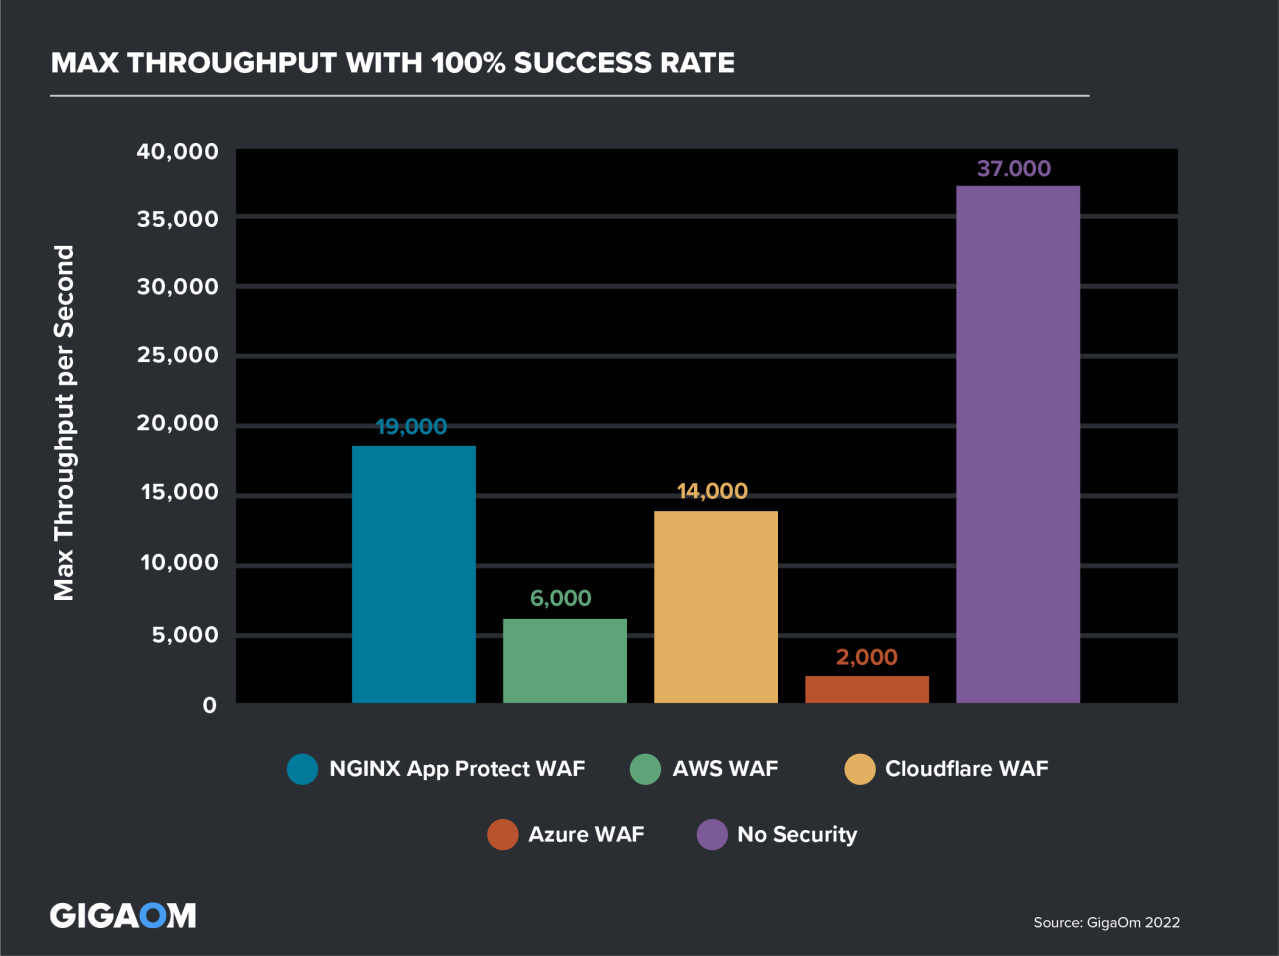 Graph showing maximum throughput at 100% success rate: 19,000 RPS for NGINX App Protect WAF; 14,000 RPS for Cloudflare WAF; 6,000 RPS for AWS WAF; 2,000 RPS for Azure WAF